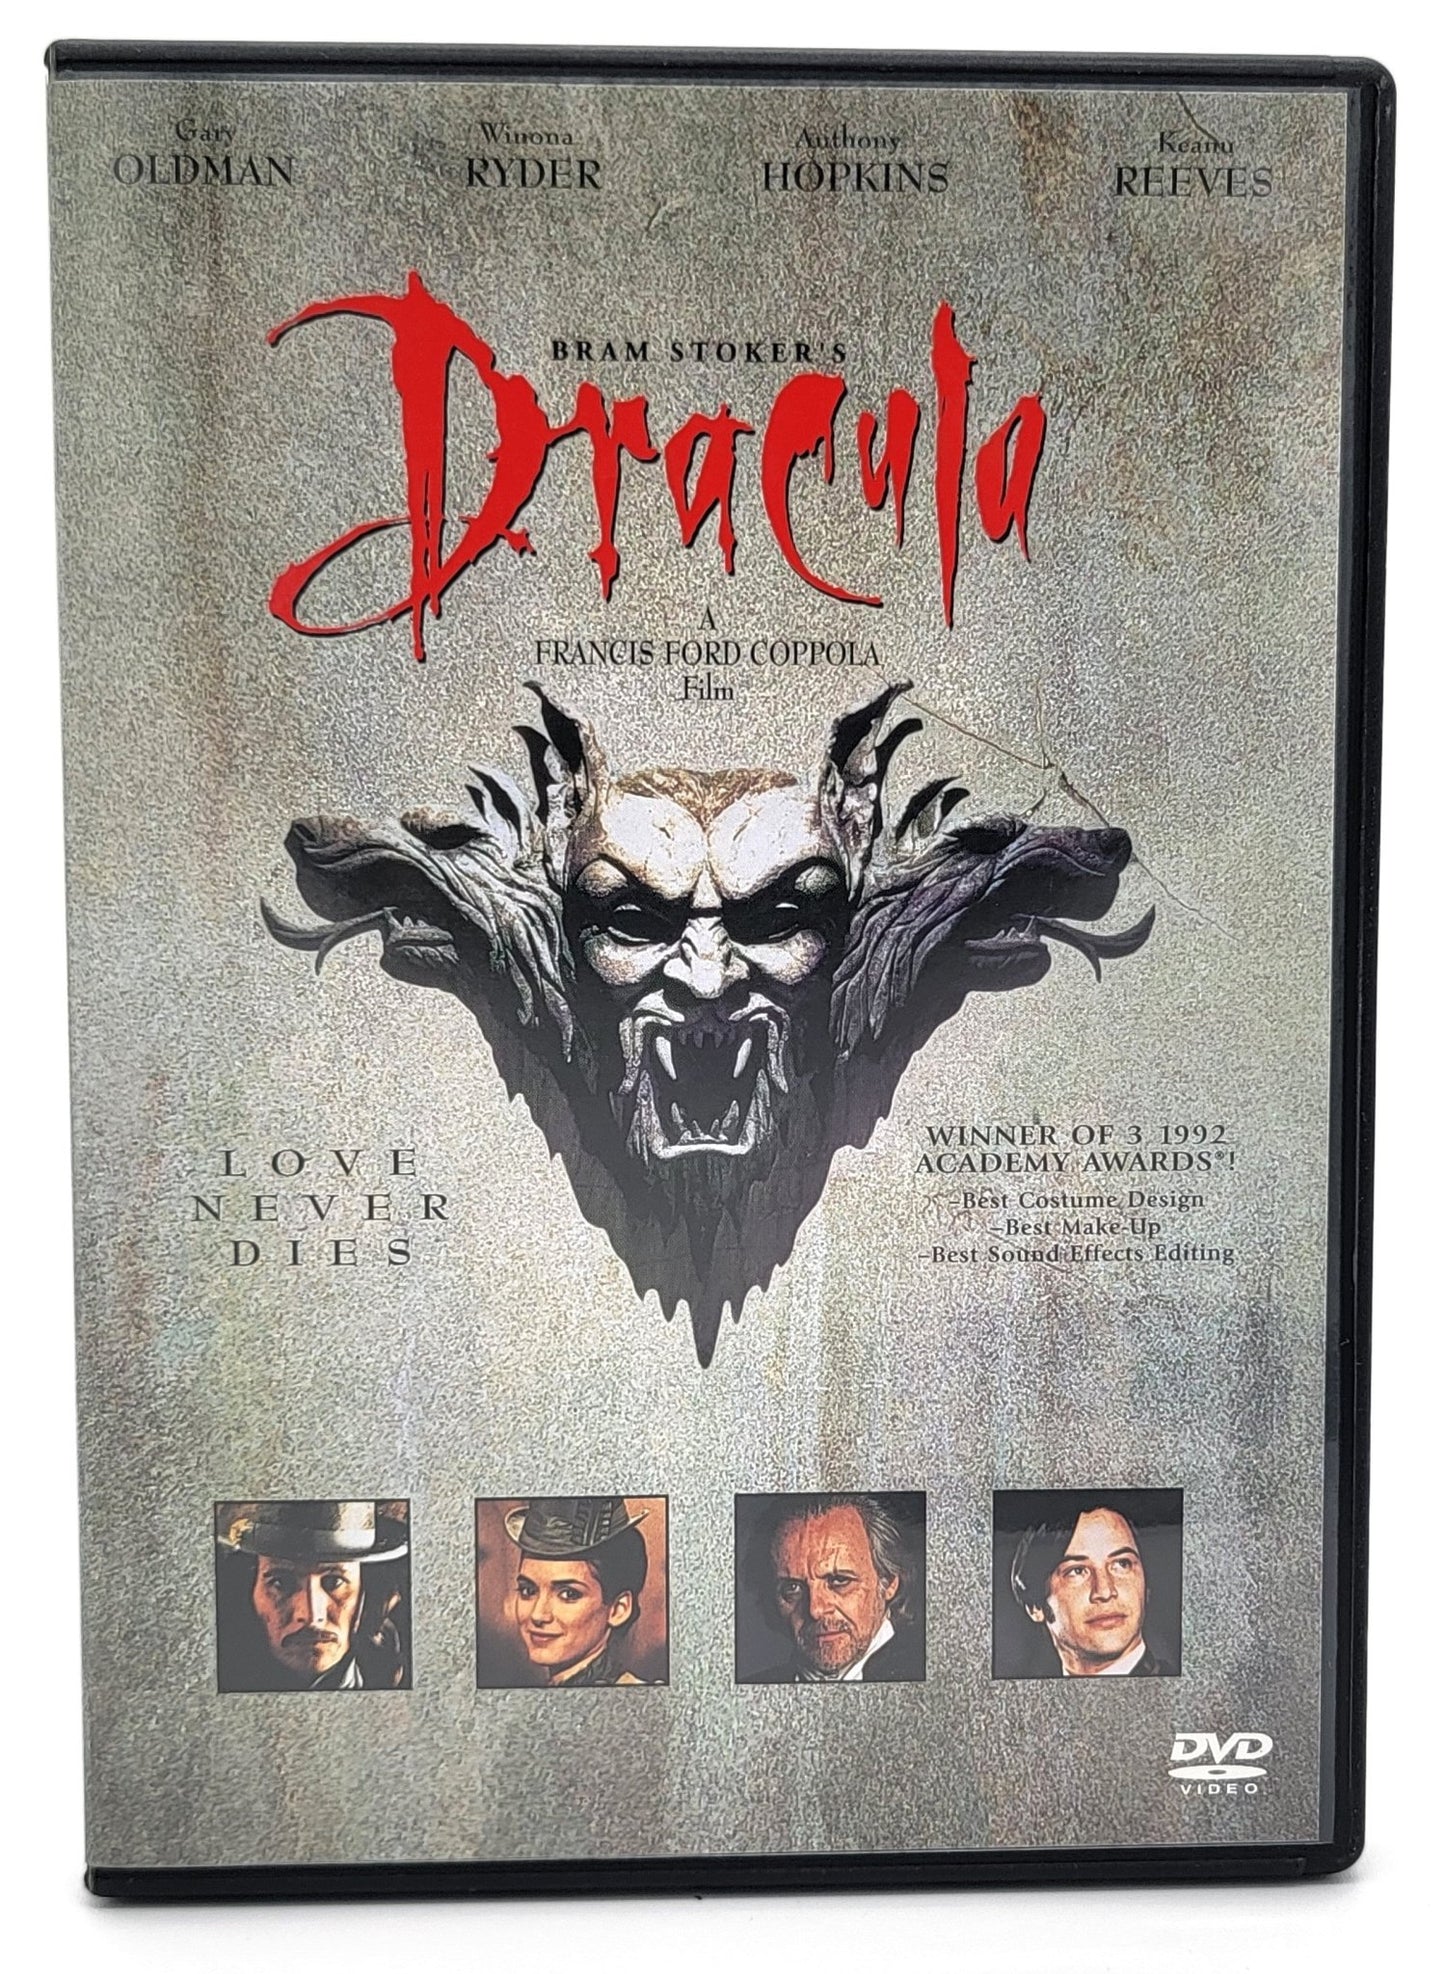 Columbia Pictures - Dracula - Bram Stoker's | DVD | A Francis Ford Coppola Film | Widescreen - DVD - Steady Bunny Shop